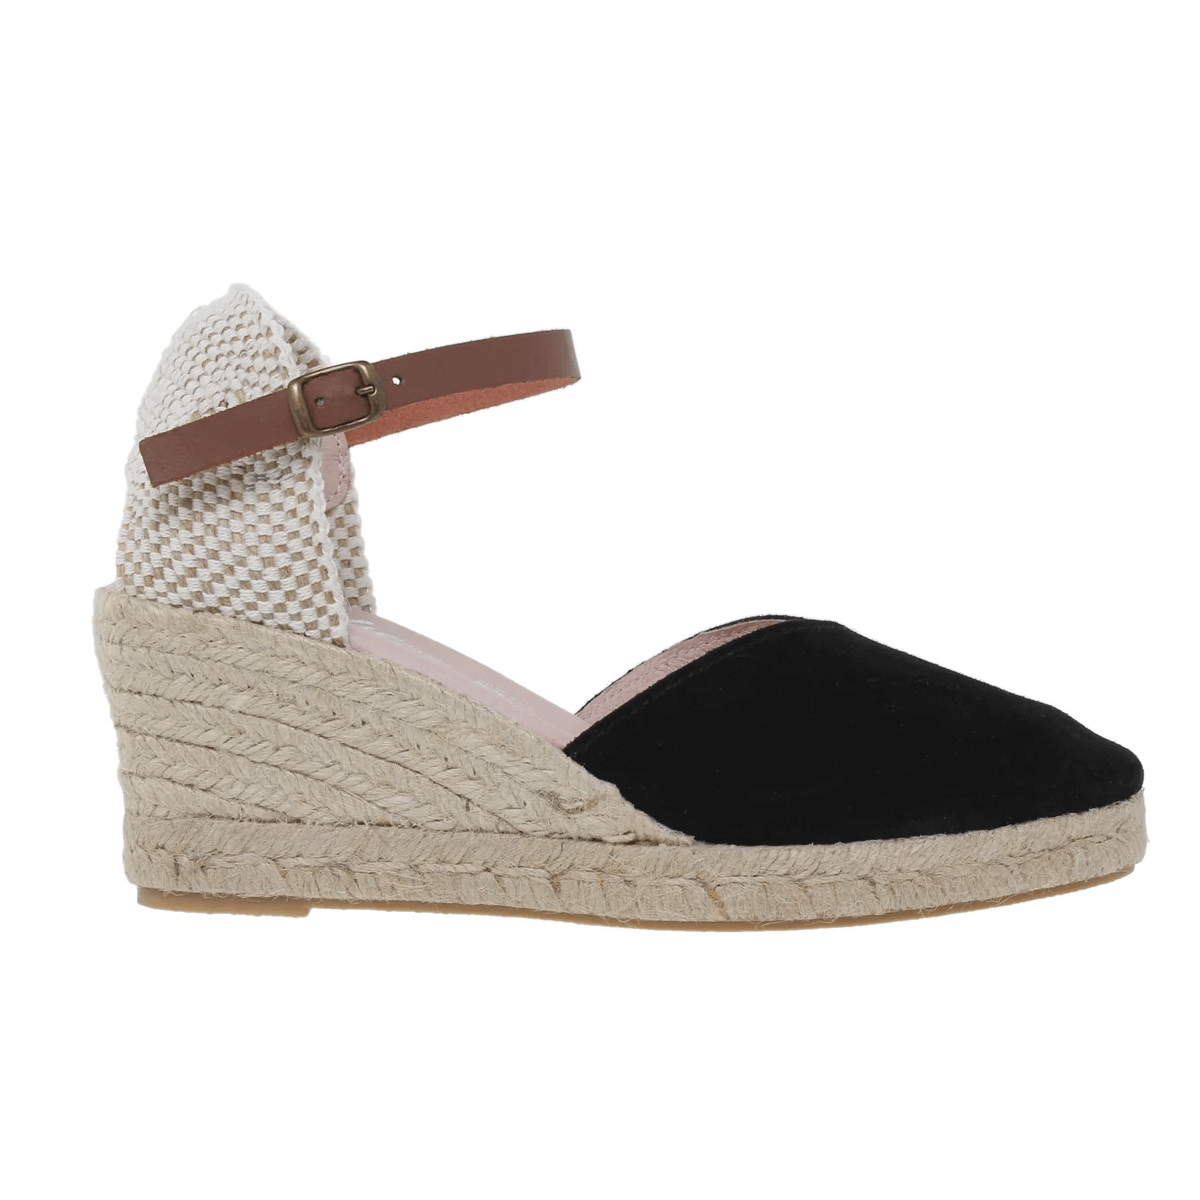 Black leather espadrilles with wedge by Amelie